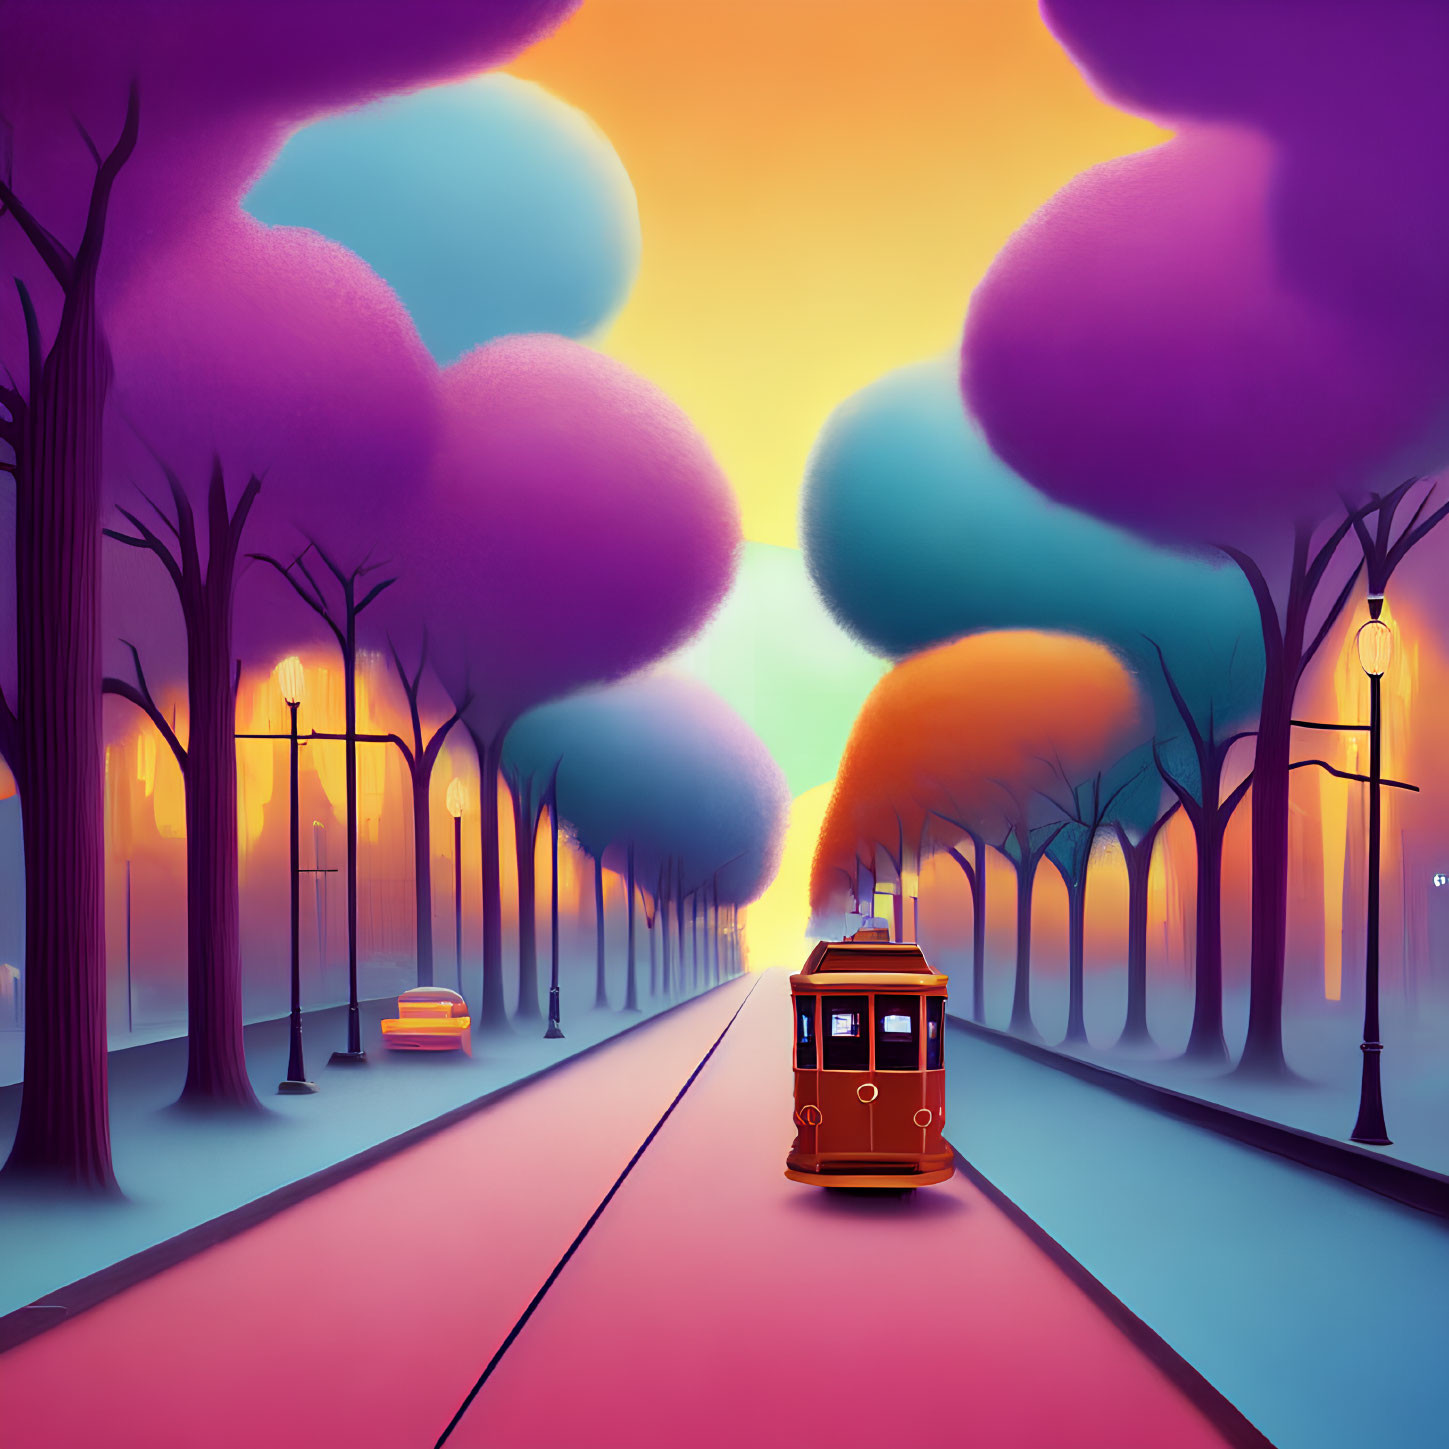 Colorful vintage tram illustration with whimsical trees and vibrant sunset sky.